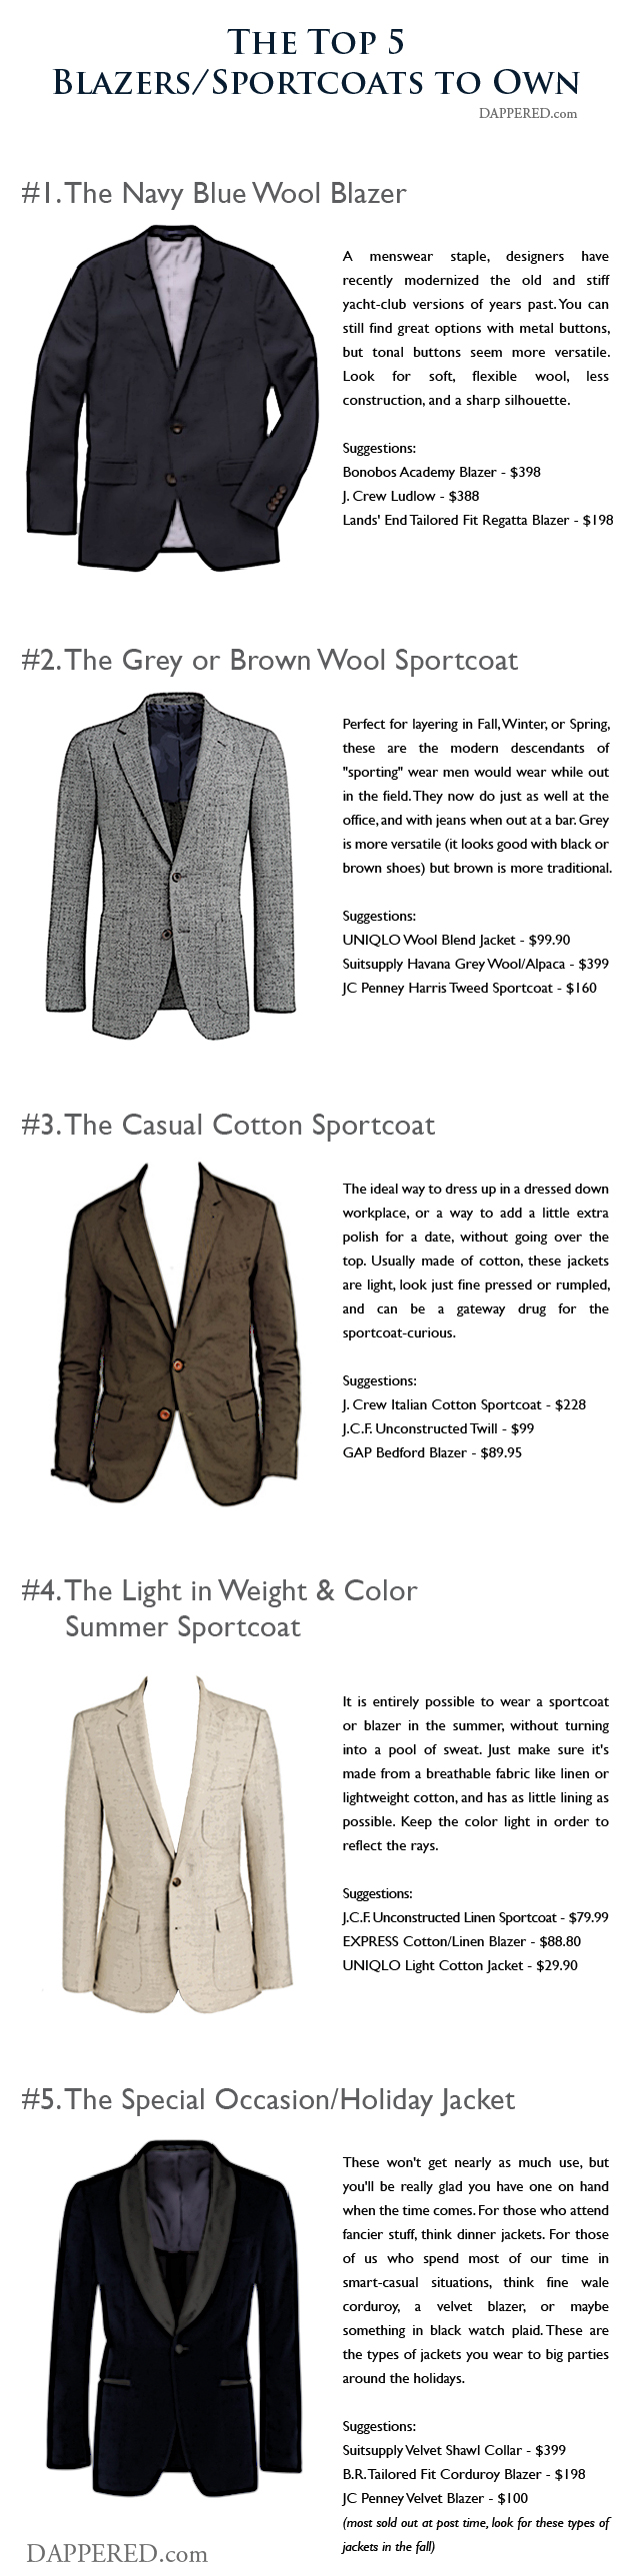 The Top 5 Types of Blazers / Sportcoats to Own | Dappered.com